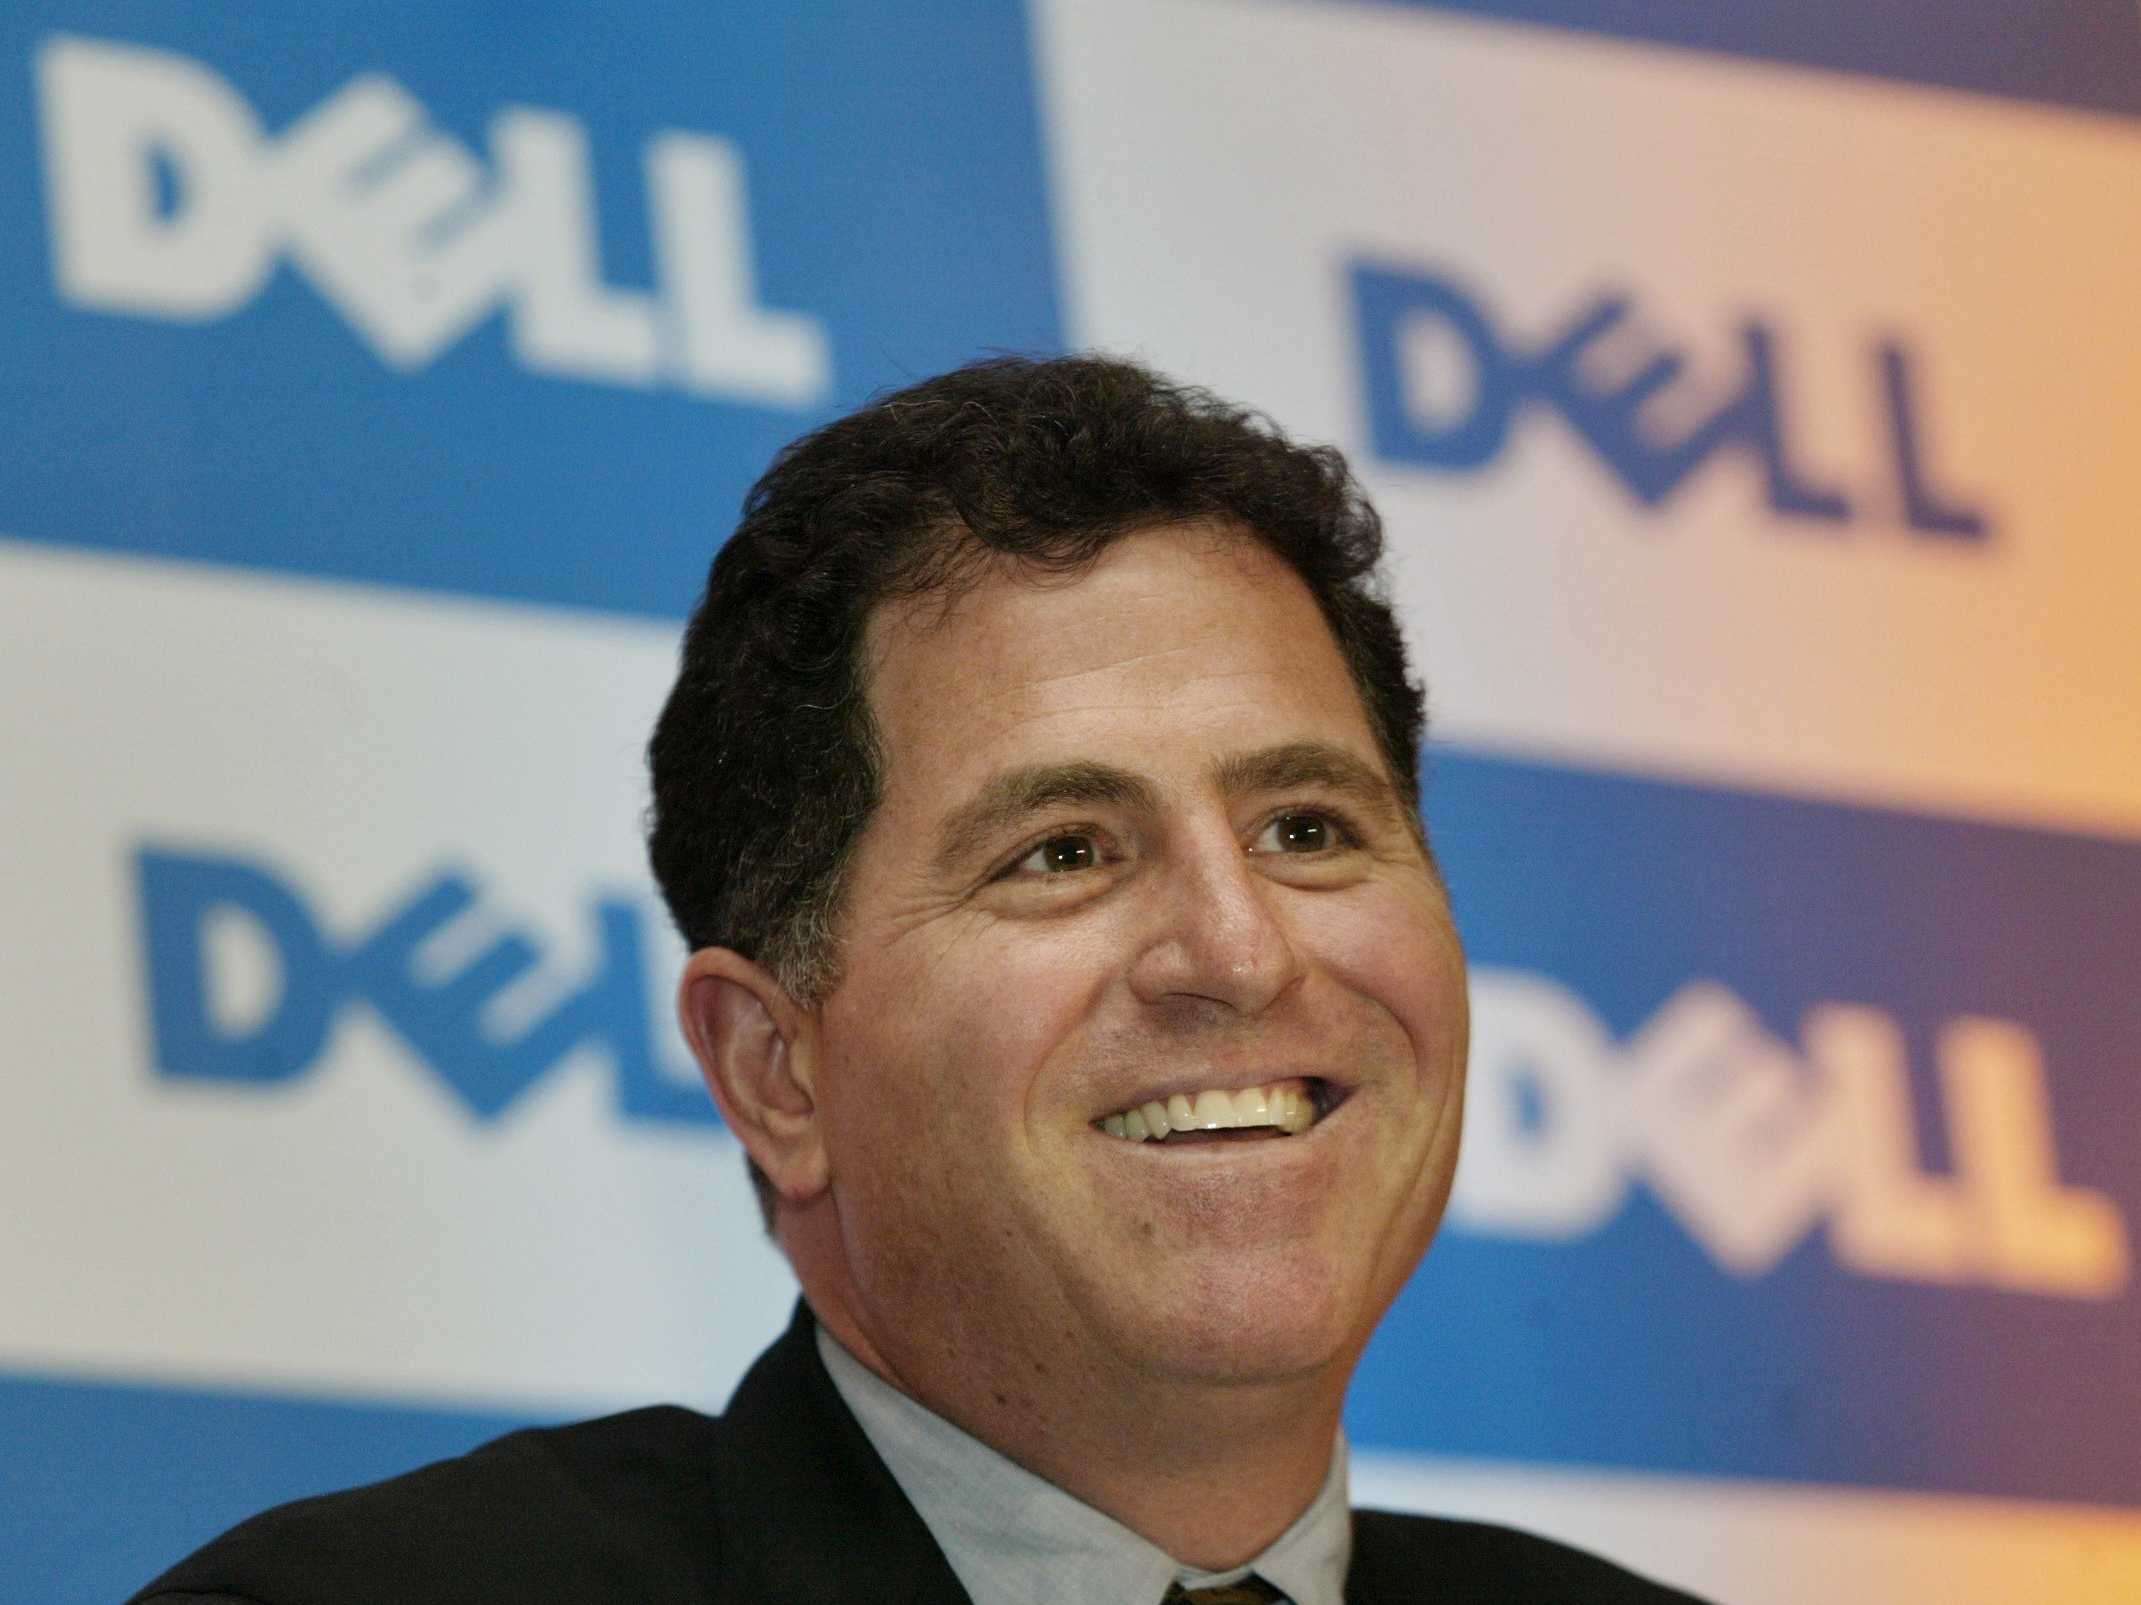 10. Michael Dell is the chairman and CEO of Dell. Business Insider India